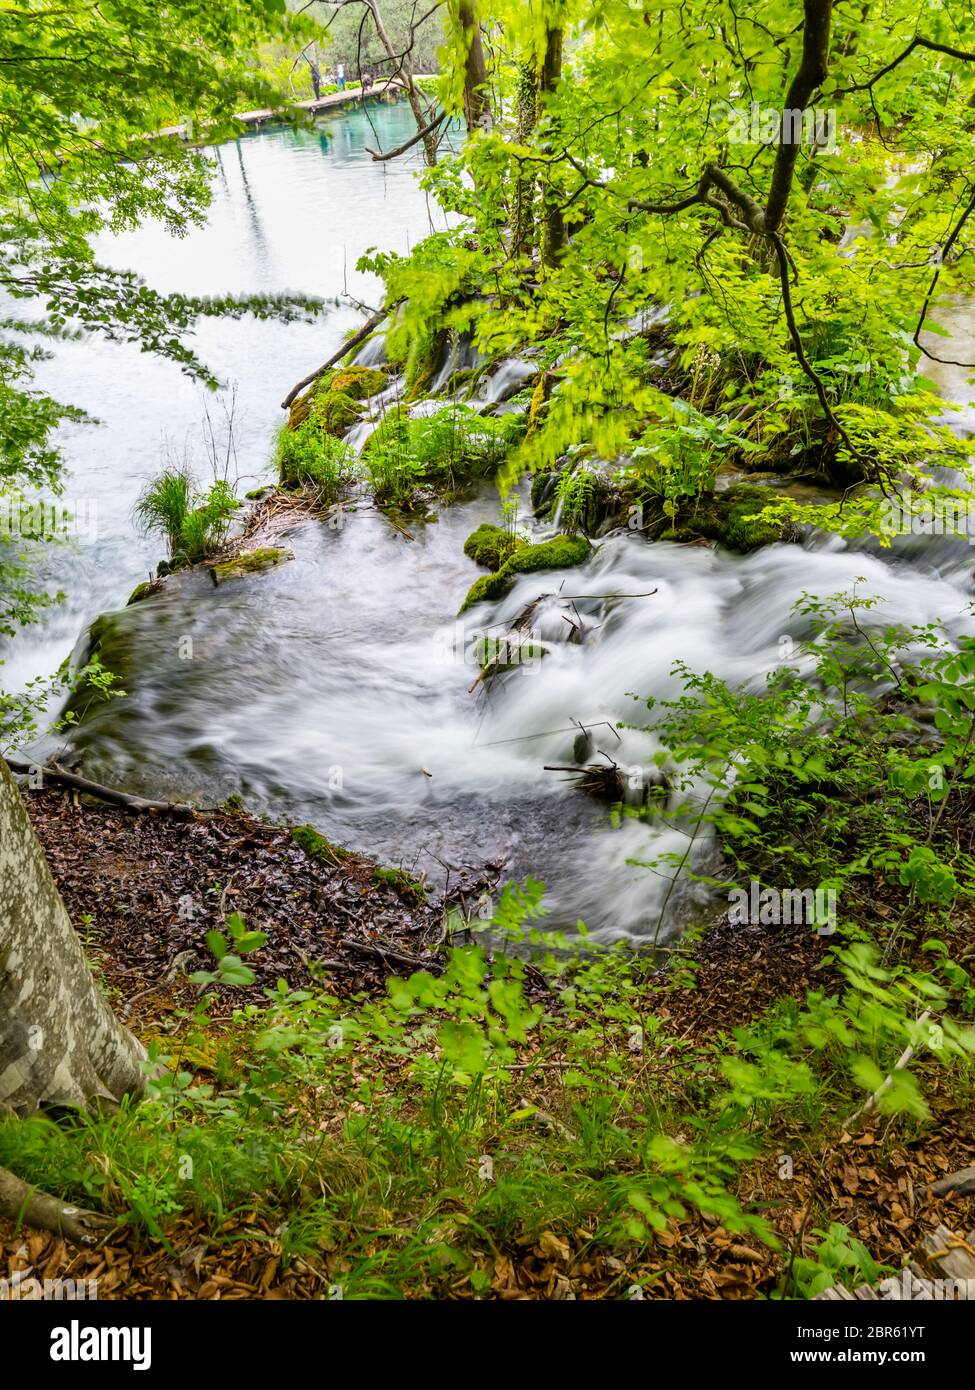 Plitvice lakes intensive vivid Green forest in Spring season in Croatia Europe empty cascading waterfall river flow riverflow long exposure Stock Photo